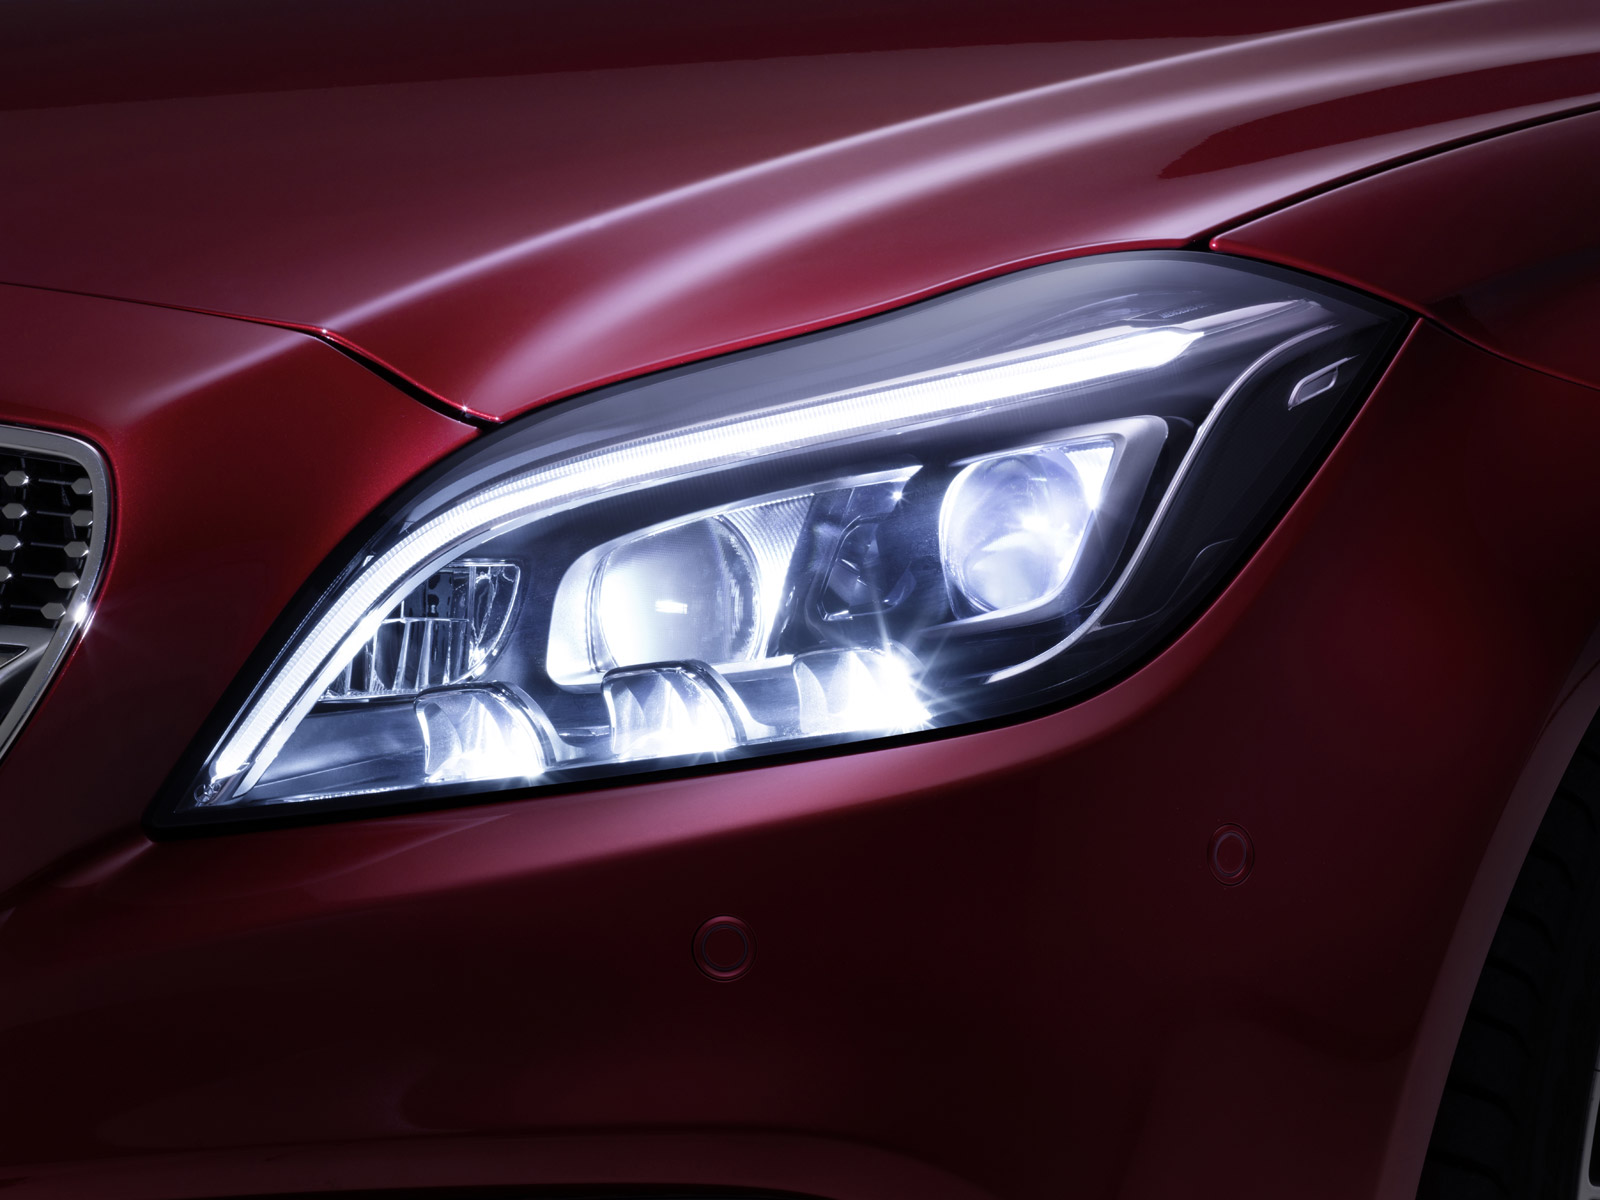 Revocation satisfaction burst Mercedes to debut MULTIBEAM LED headlight technology on 2015 CLS